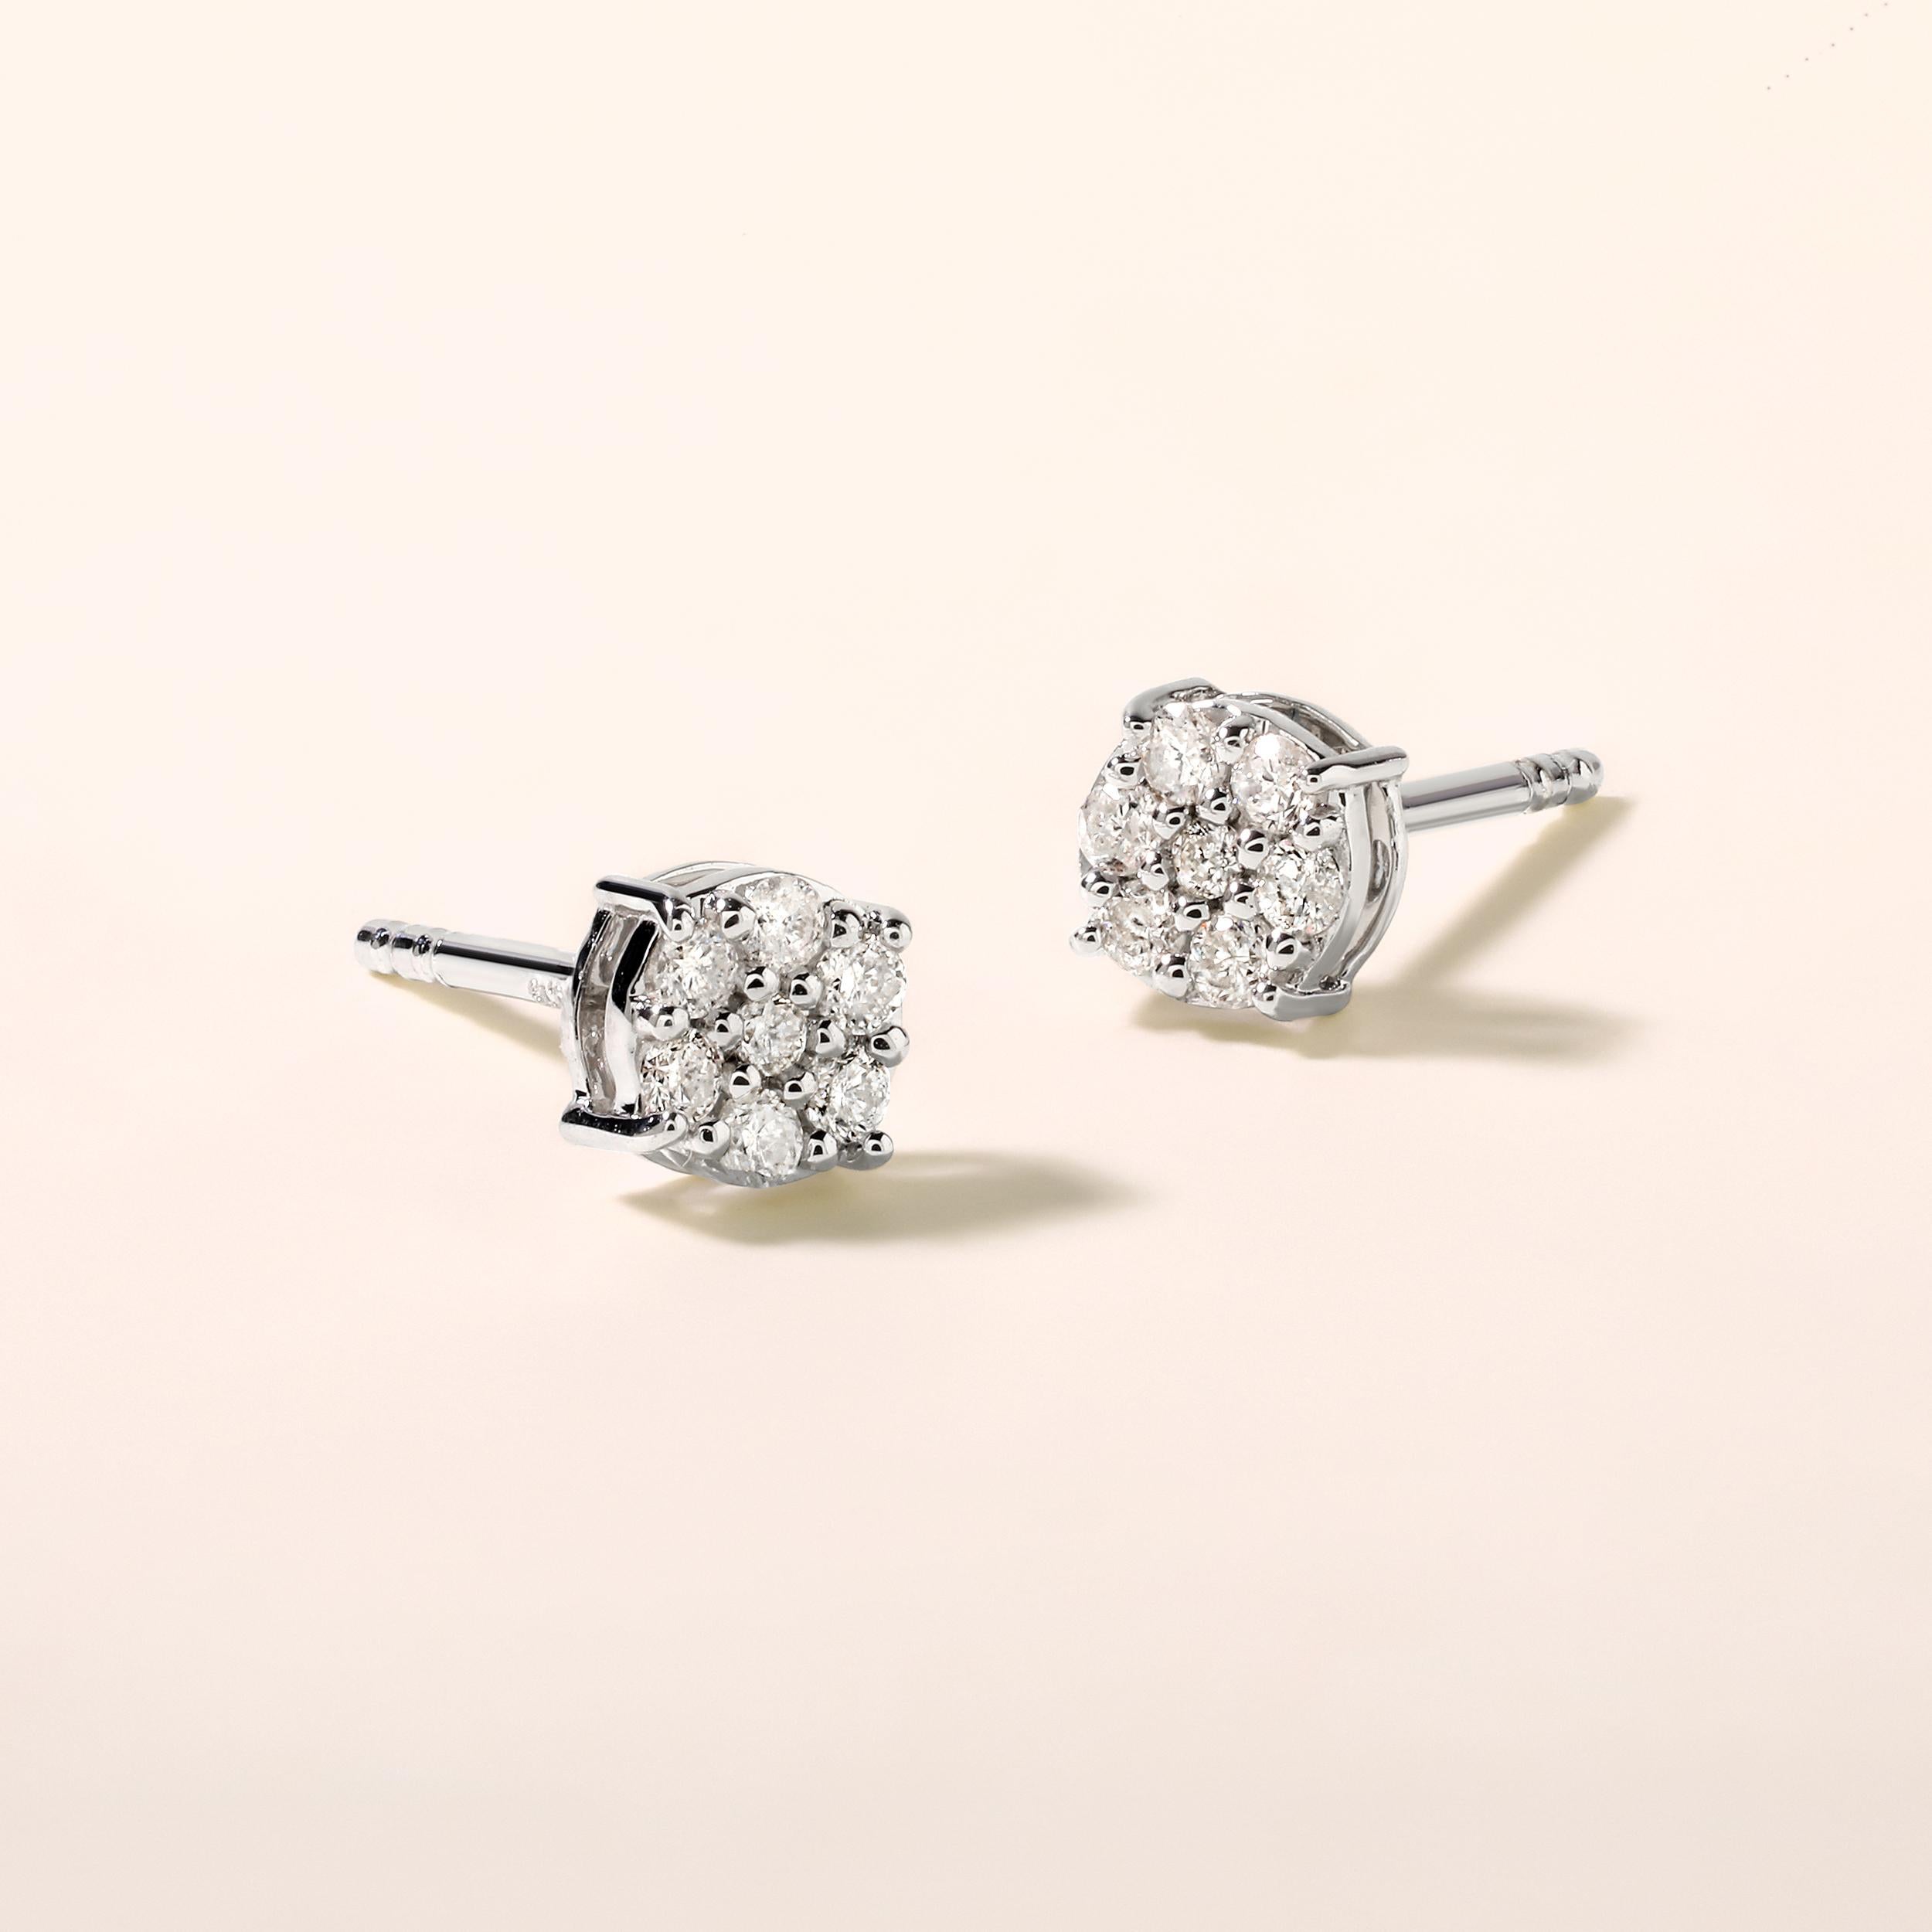 Crafted in 0.88 grams of 14K White Gold, the earrings contains 14 stones of Round Diamonds with a total of 0.19 carat in F-G color and I1-I2 clarity.

This jewelry piece will be expertly crafted by our skilled artisans upon order. Allow us a